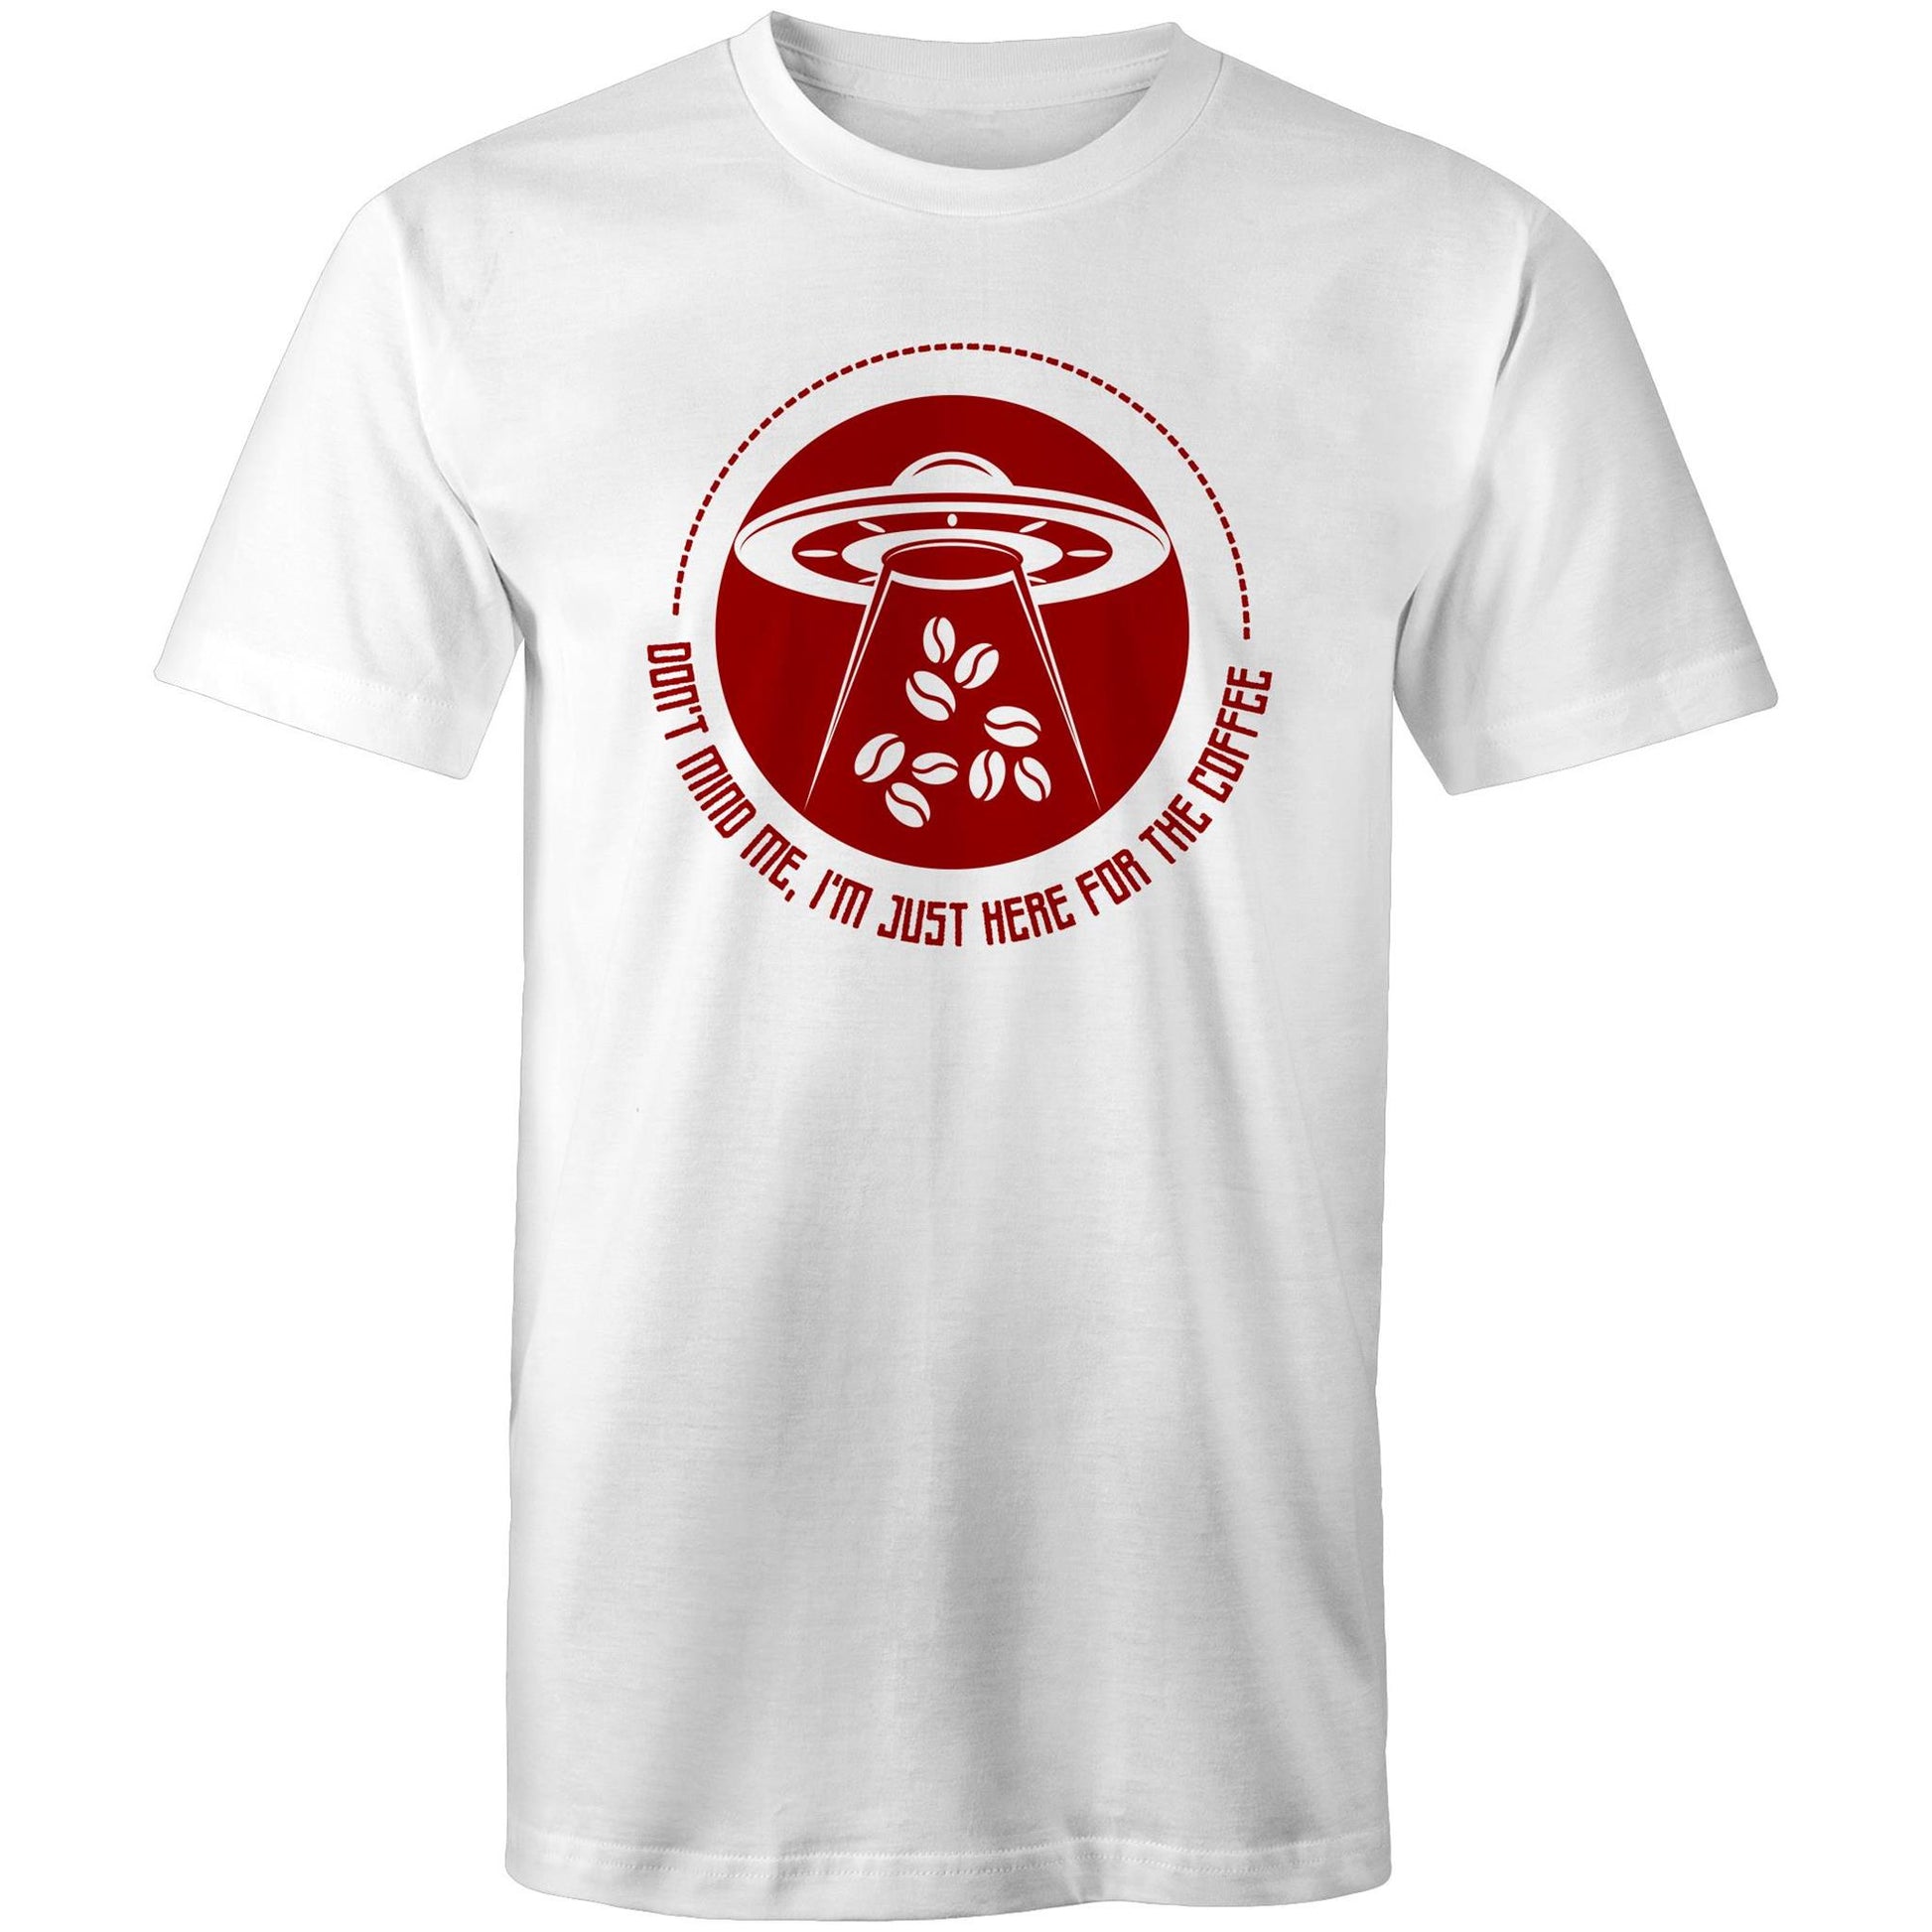 Don't Mind Me, I'm Just Here For The Coffee, Alien UFO - Mens T-Shirt White Mens T-shirt Coffee Sci Fi